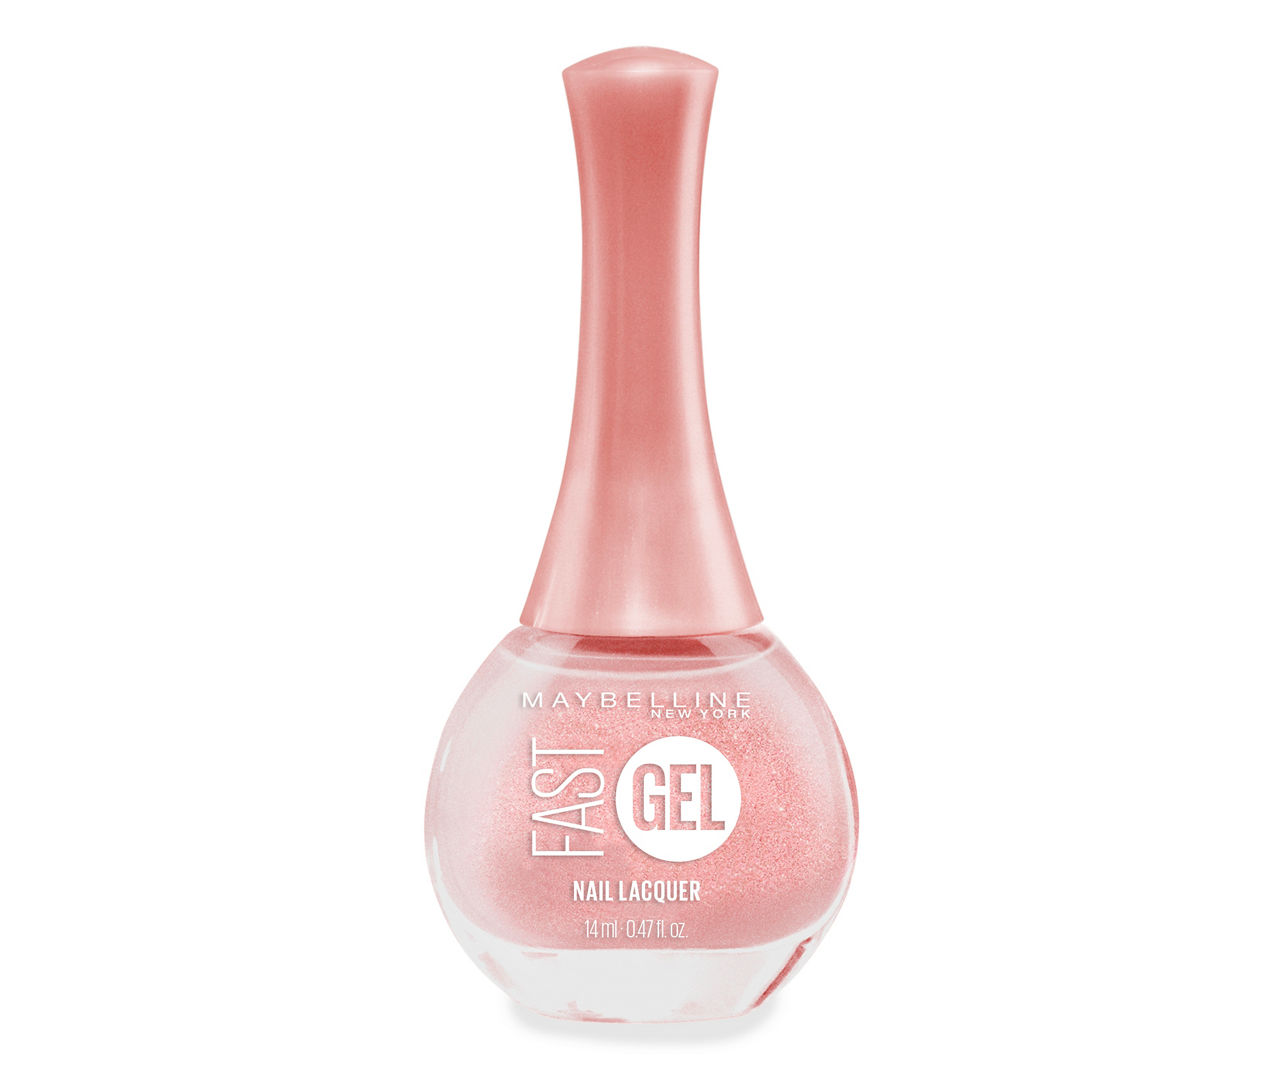 Big Nail 0.47 Flush Oz. Gel | Lacquer, Maybelline Nude Lots